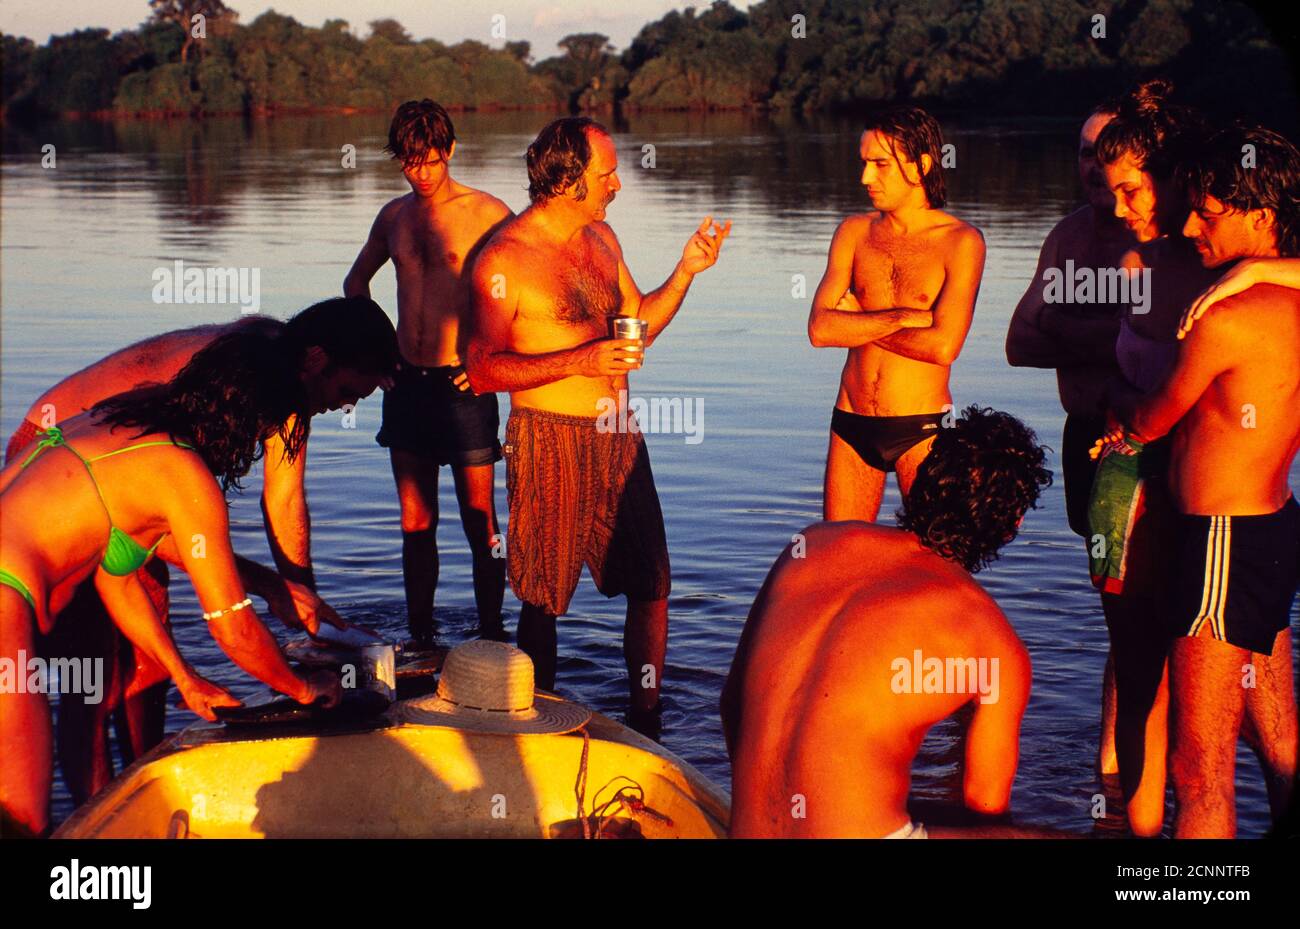 Pantanal, Brazilian telenovela – TV serial drama , soap opera -  originally aired in 1990 on Rede Manchete – Brazilian television network extintic in 1999 - written by Benedito Ruy Barbosa and directed by Jayme Monjardim - actors Claudio Marzo, Almir Sater, Marcos Winter, Cristiana Oliveira, Angelo Antonio and others relax at the riverside during a break on the recordings. The Pantanal region, whose name derives from the Portuguese word pântano - meaning swamp -  is one of the largest freshwater wetland ecosystems in the world. The region has been called an ecological paradise. The location, a Stock Photo